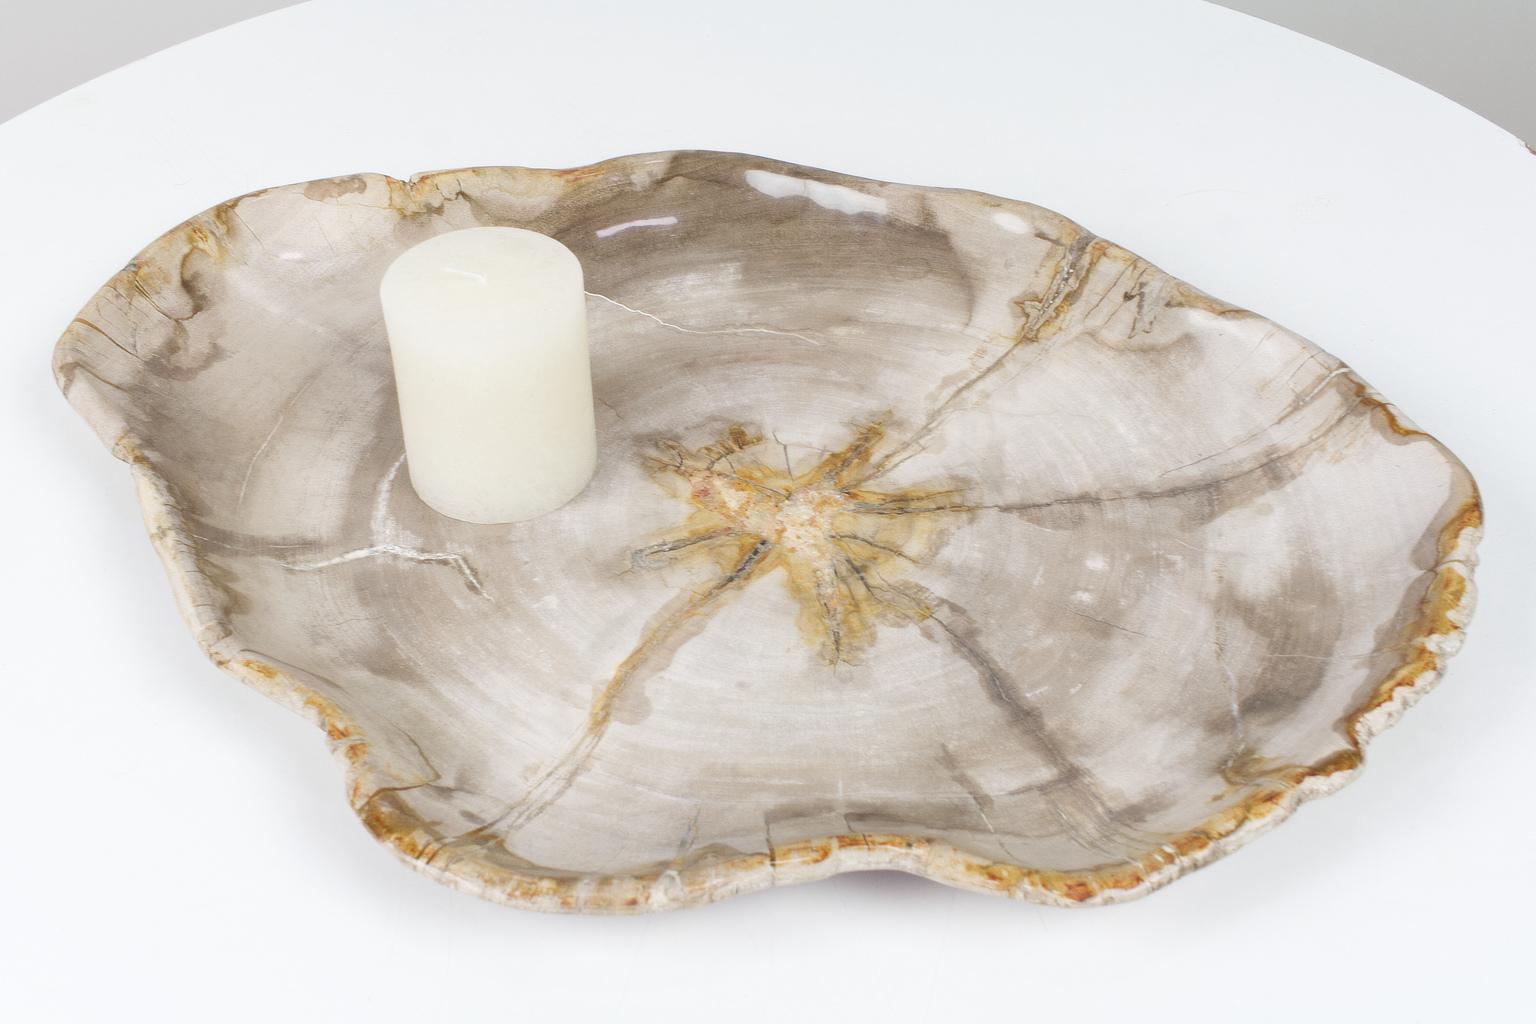 Smooth sanded (high glossy) petrified wooden plate, platter or accessory in beige tones. This ancient and unique object is of organic origin and has the original organic shape. The petrified wood is an end product of a mineralisation process (in